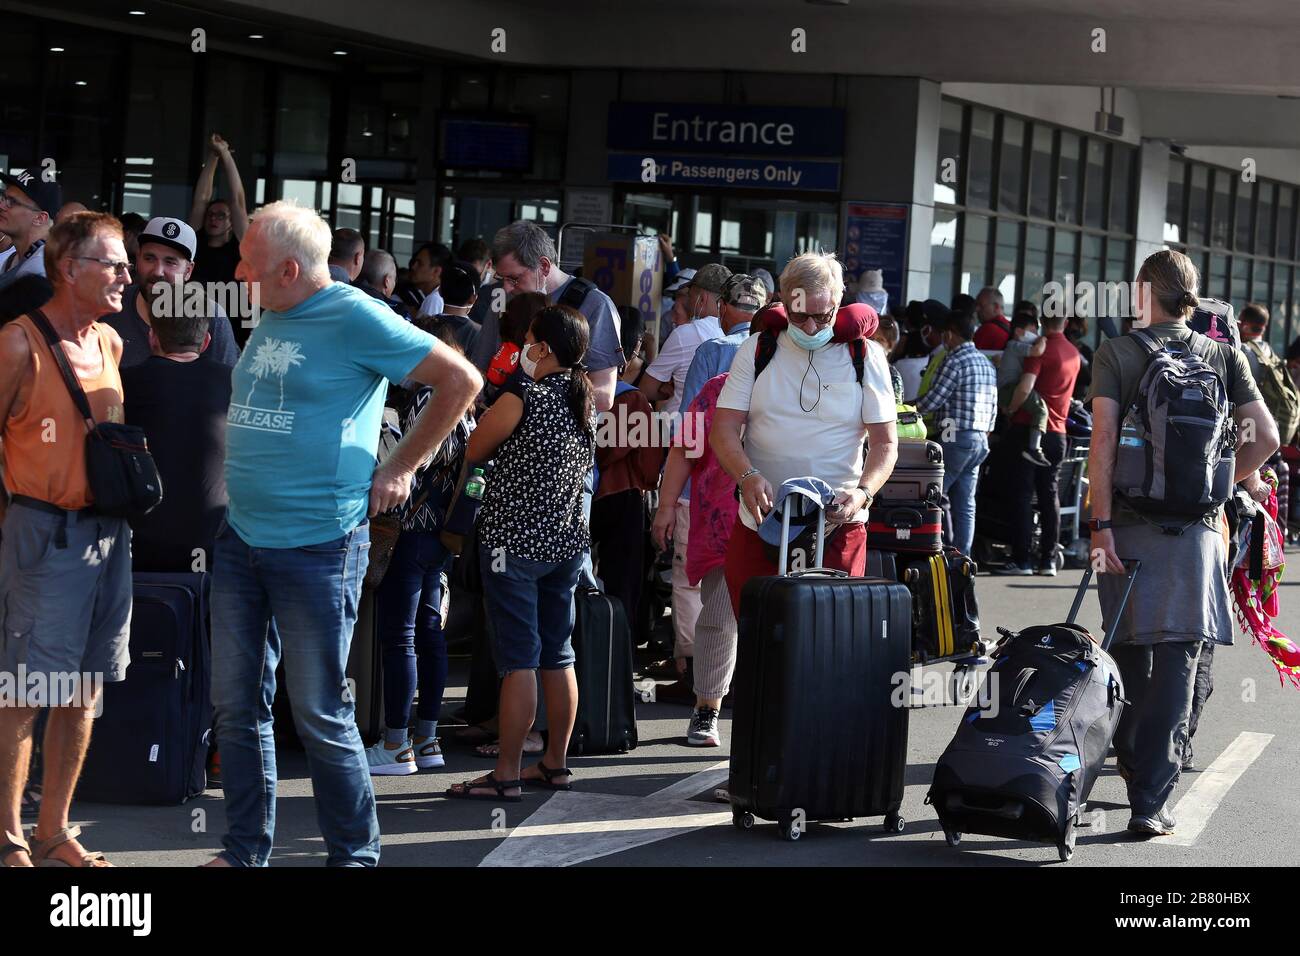 Manila, Philippines. 20th Mar, 2020. There are tourists at the airport. More than 300 Germans are waiting at Ninoy Aquino International Airport for a Lufthansa flight chartered by the German Embassy in the Philippines because of the Covid 19 pandemic. Credit: Alejandro Ernesto//Alejandro Ernesto/DPA/Alamy Live News Stock Photo